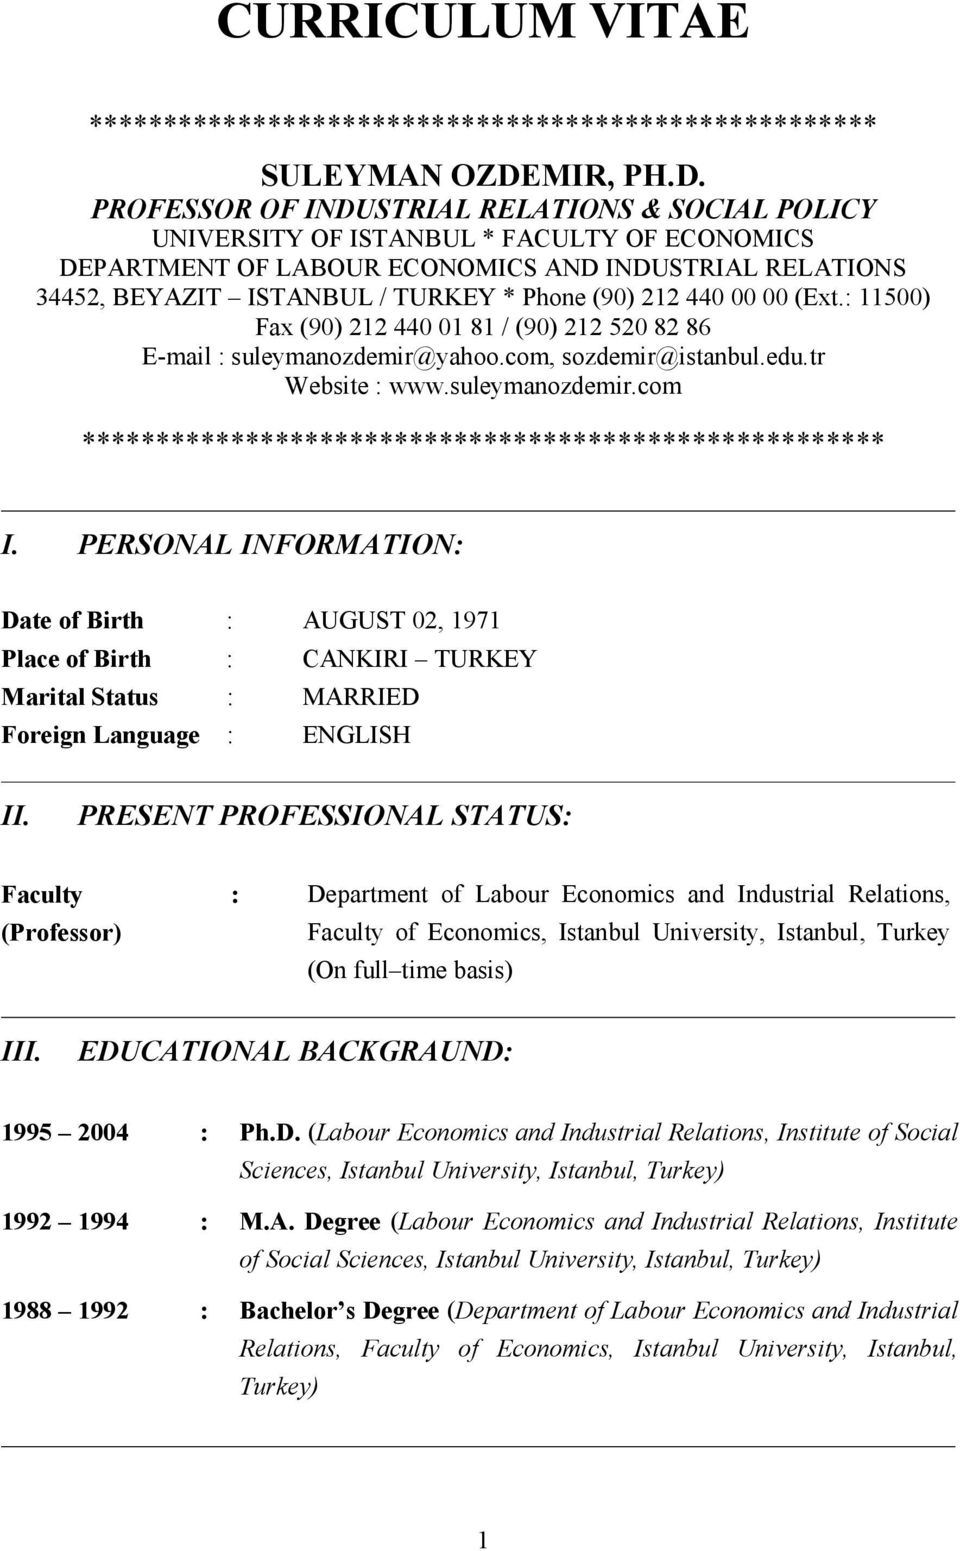 PROFESSOR OF INDUSTRIAL RELATIONS & SOCIAL POLICY UNIVERSITY OF ISTANBUL * FACULTY OF ECONOMICS DEPARTMENT OF LABOUR ECONOMICS AND INDUSTRIAL RELATIONS 4452, BEYAZIT ISTANBUL / TURKEY * Phone (90)